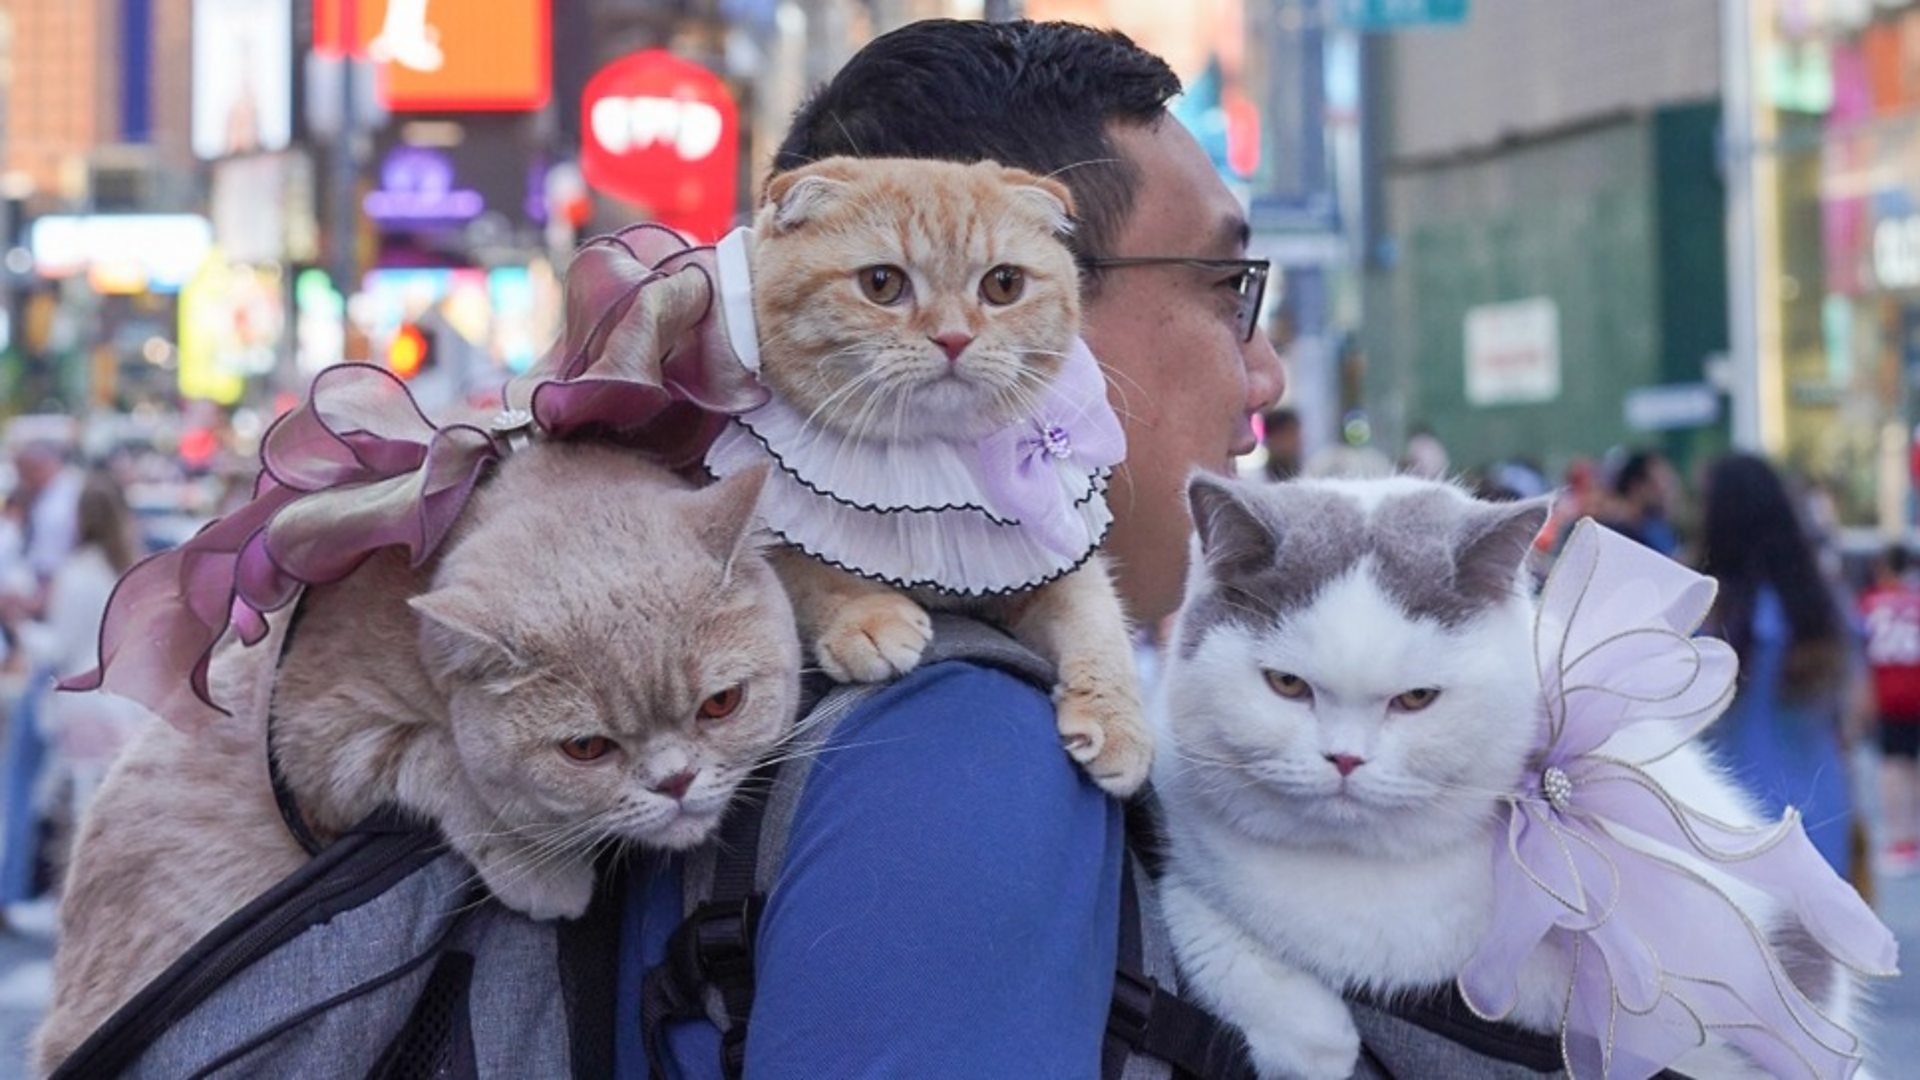 Lawyer Dan Nguyen travels the world with his three cats